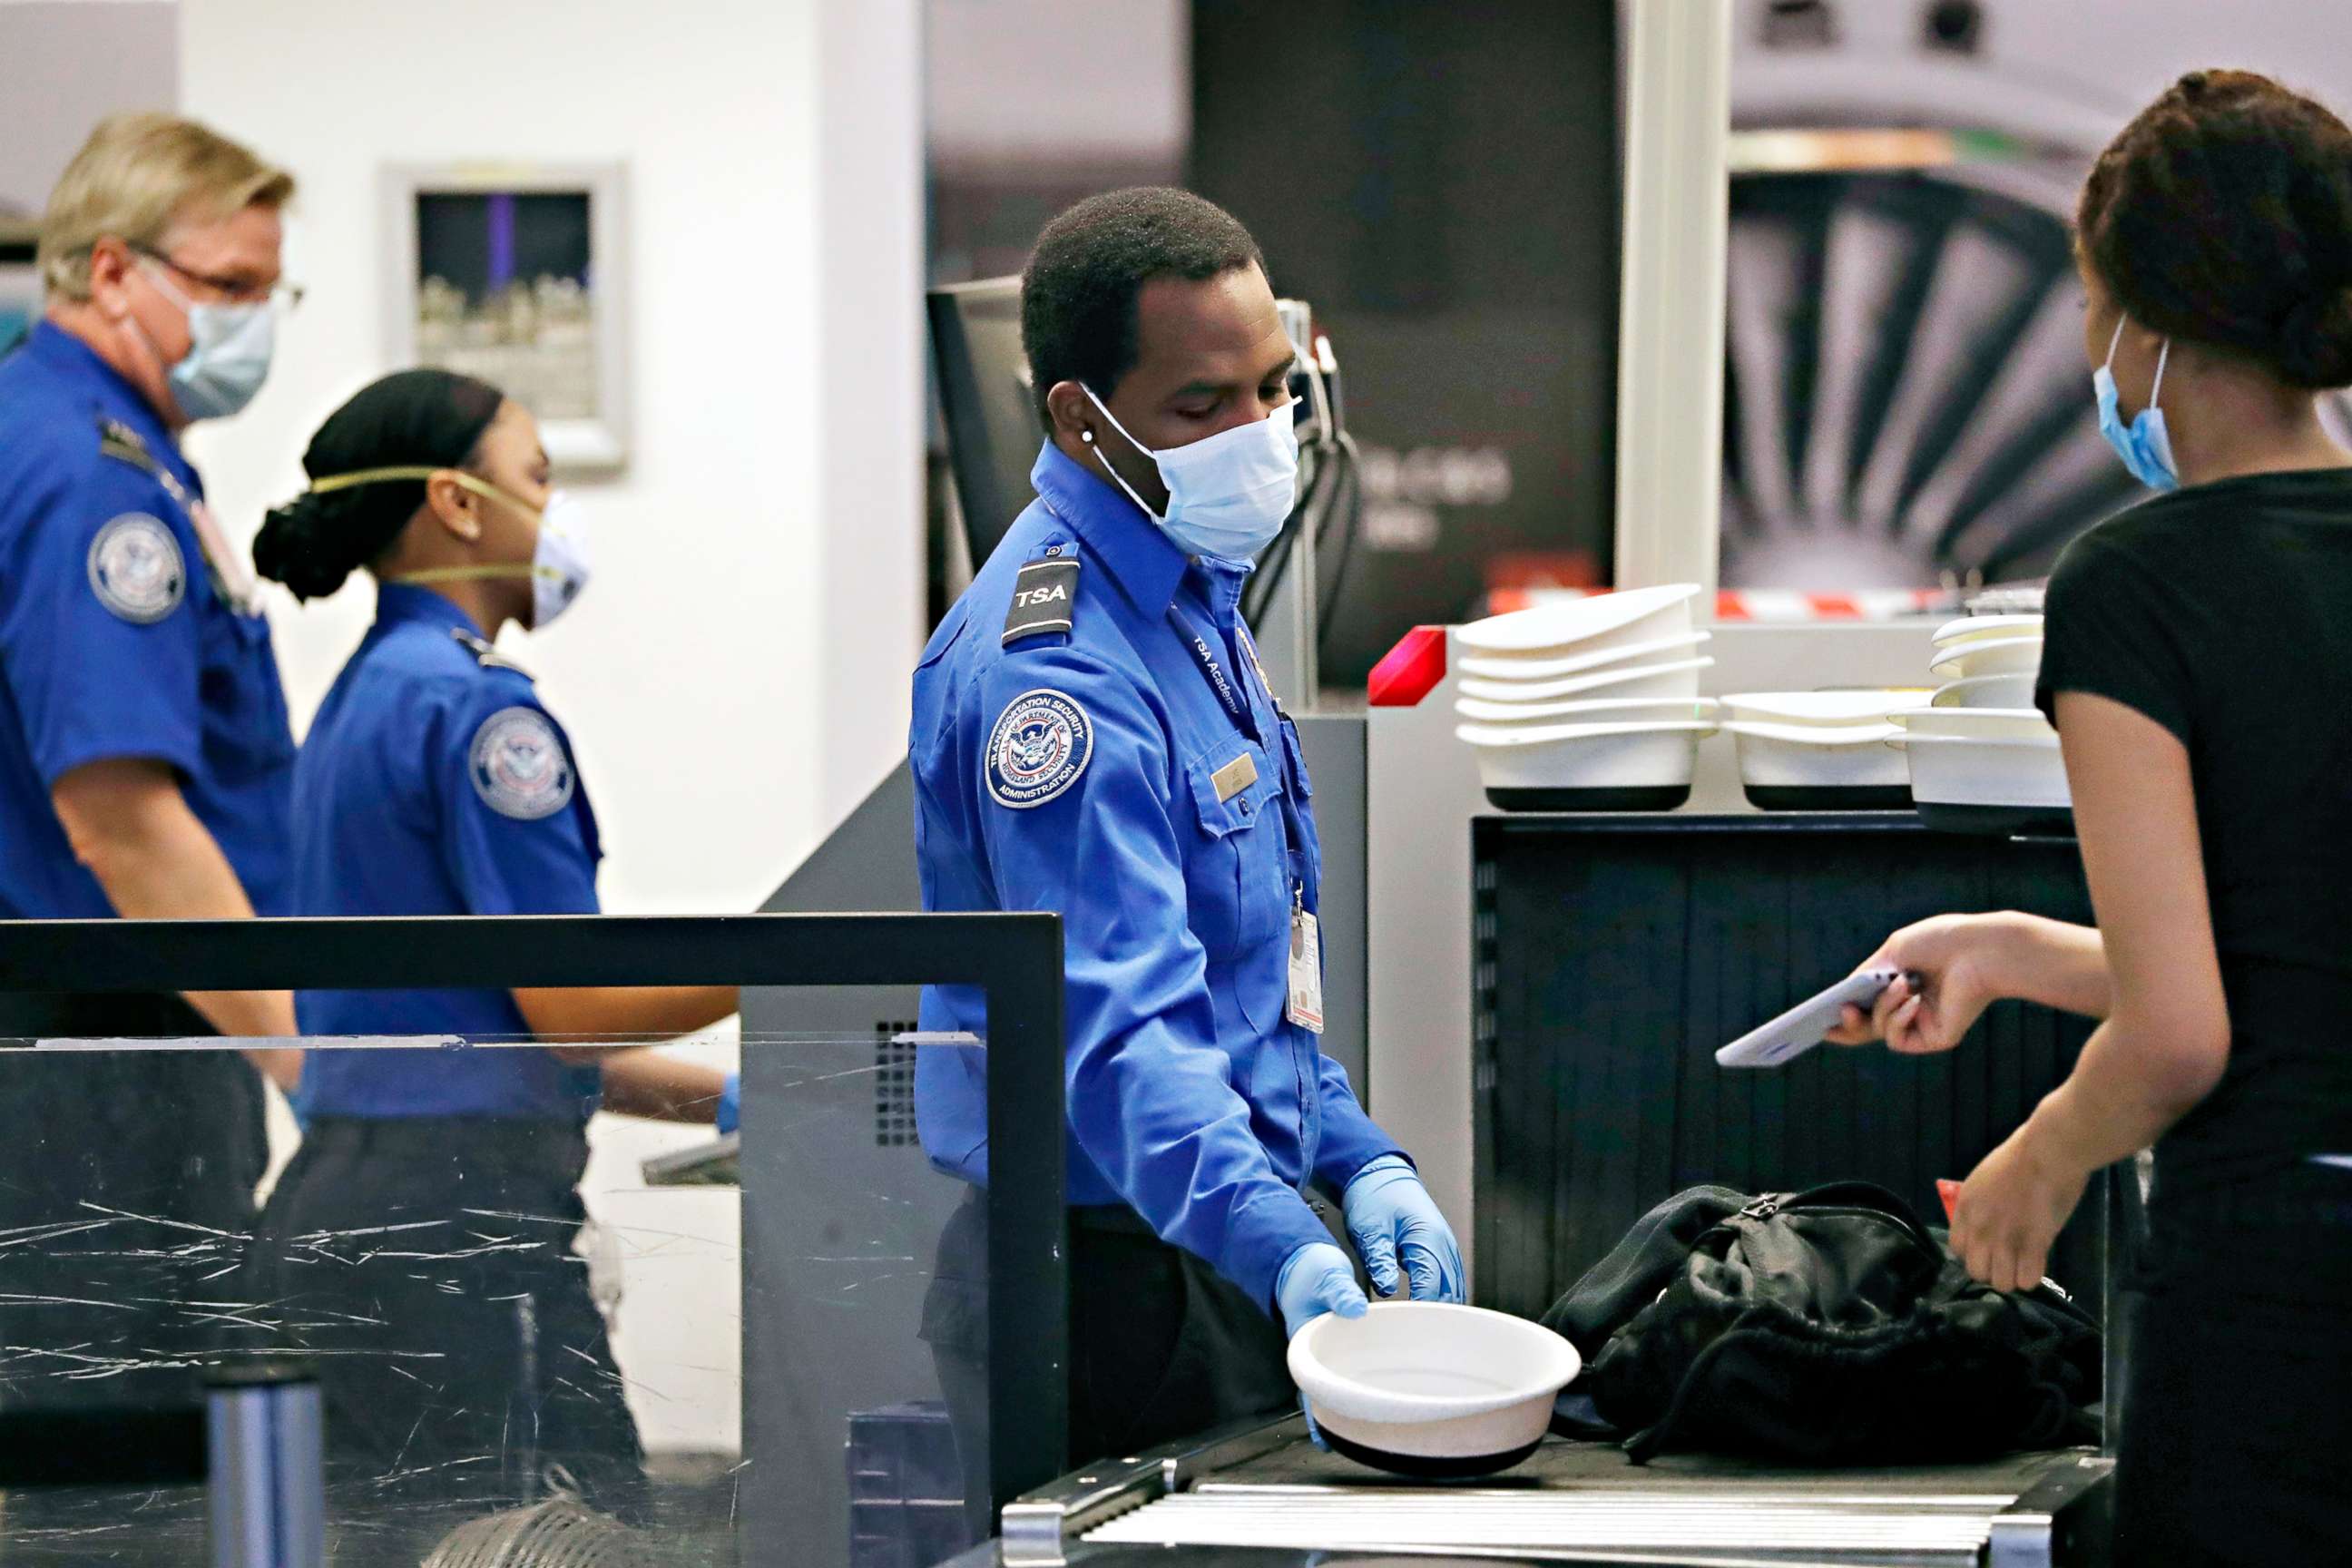 PHOTO: TSA officers wear protective masks at a security screening area at Seattle-Tacoma International Airport, May 18, 2020, in SeaTac, Wash. Travelers at the airport were required to wear face coverings in the public areas starting May 18.